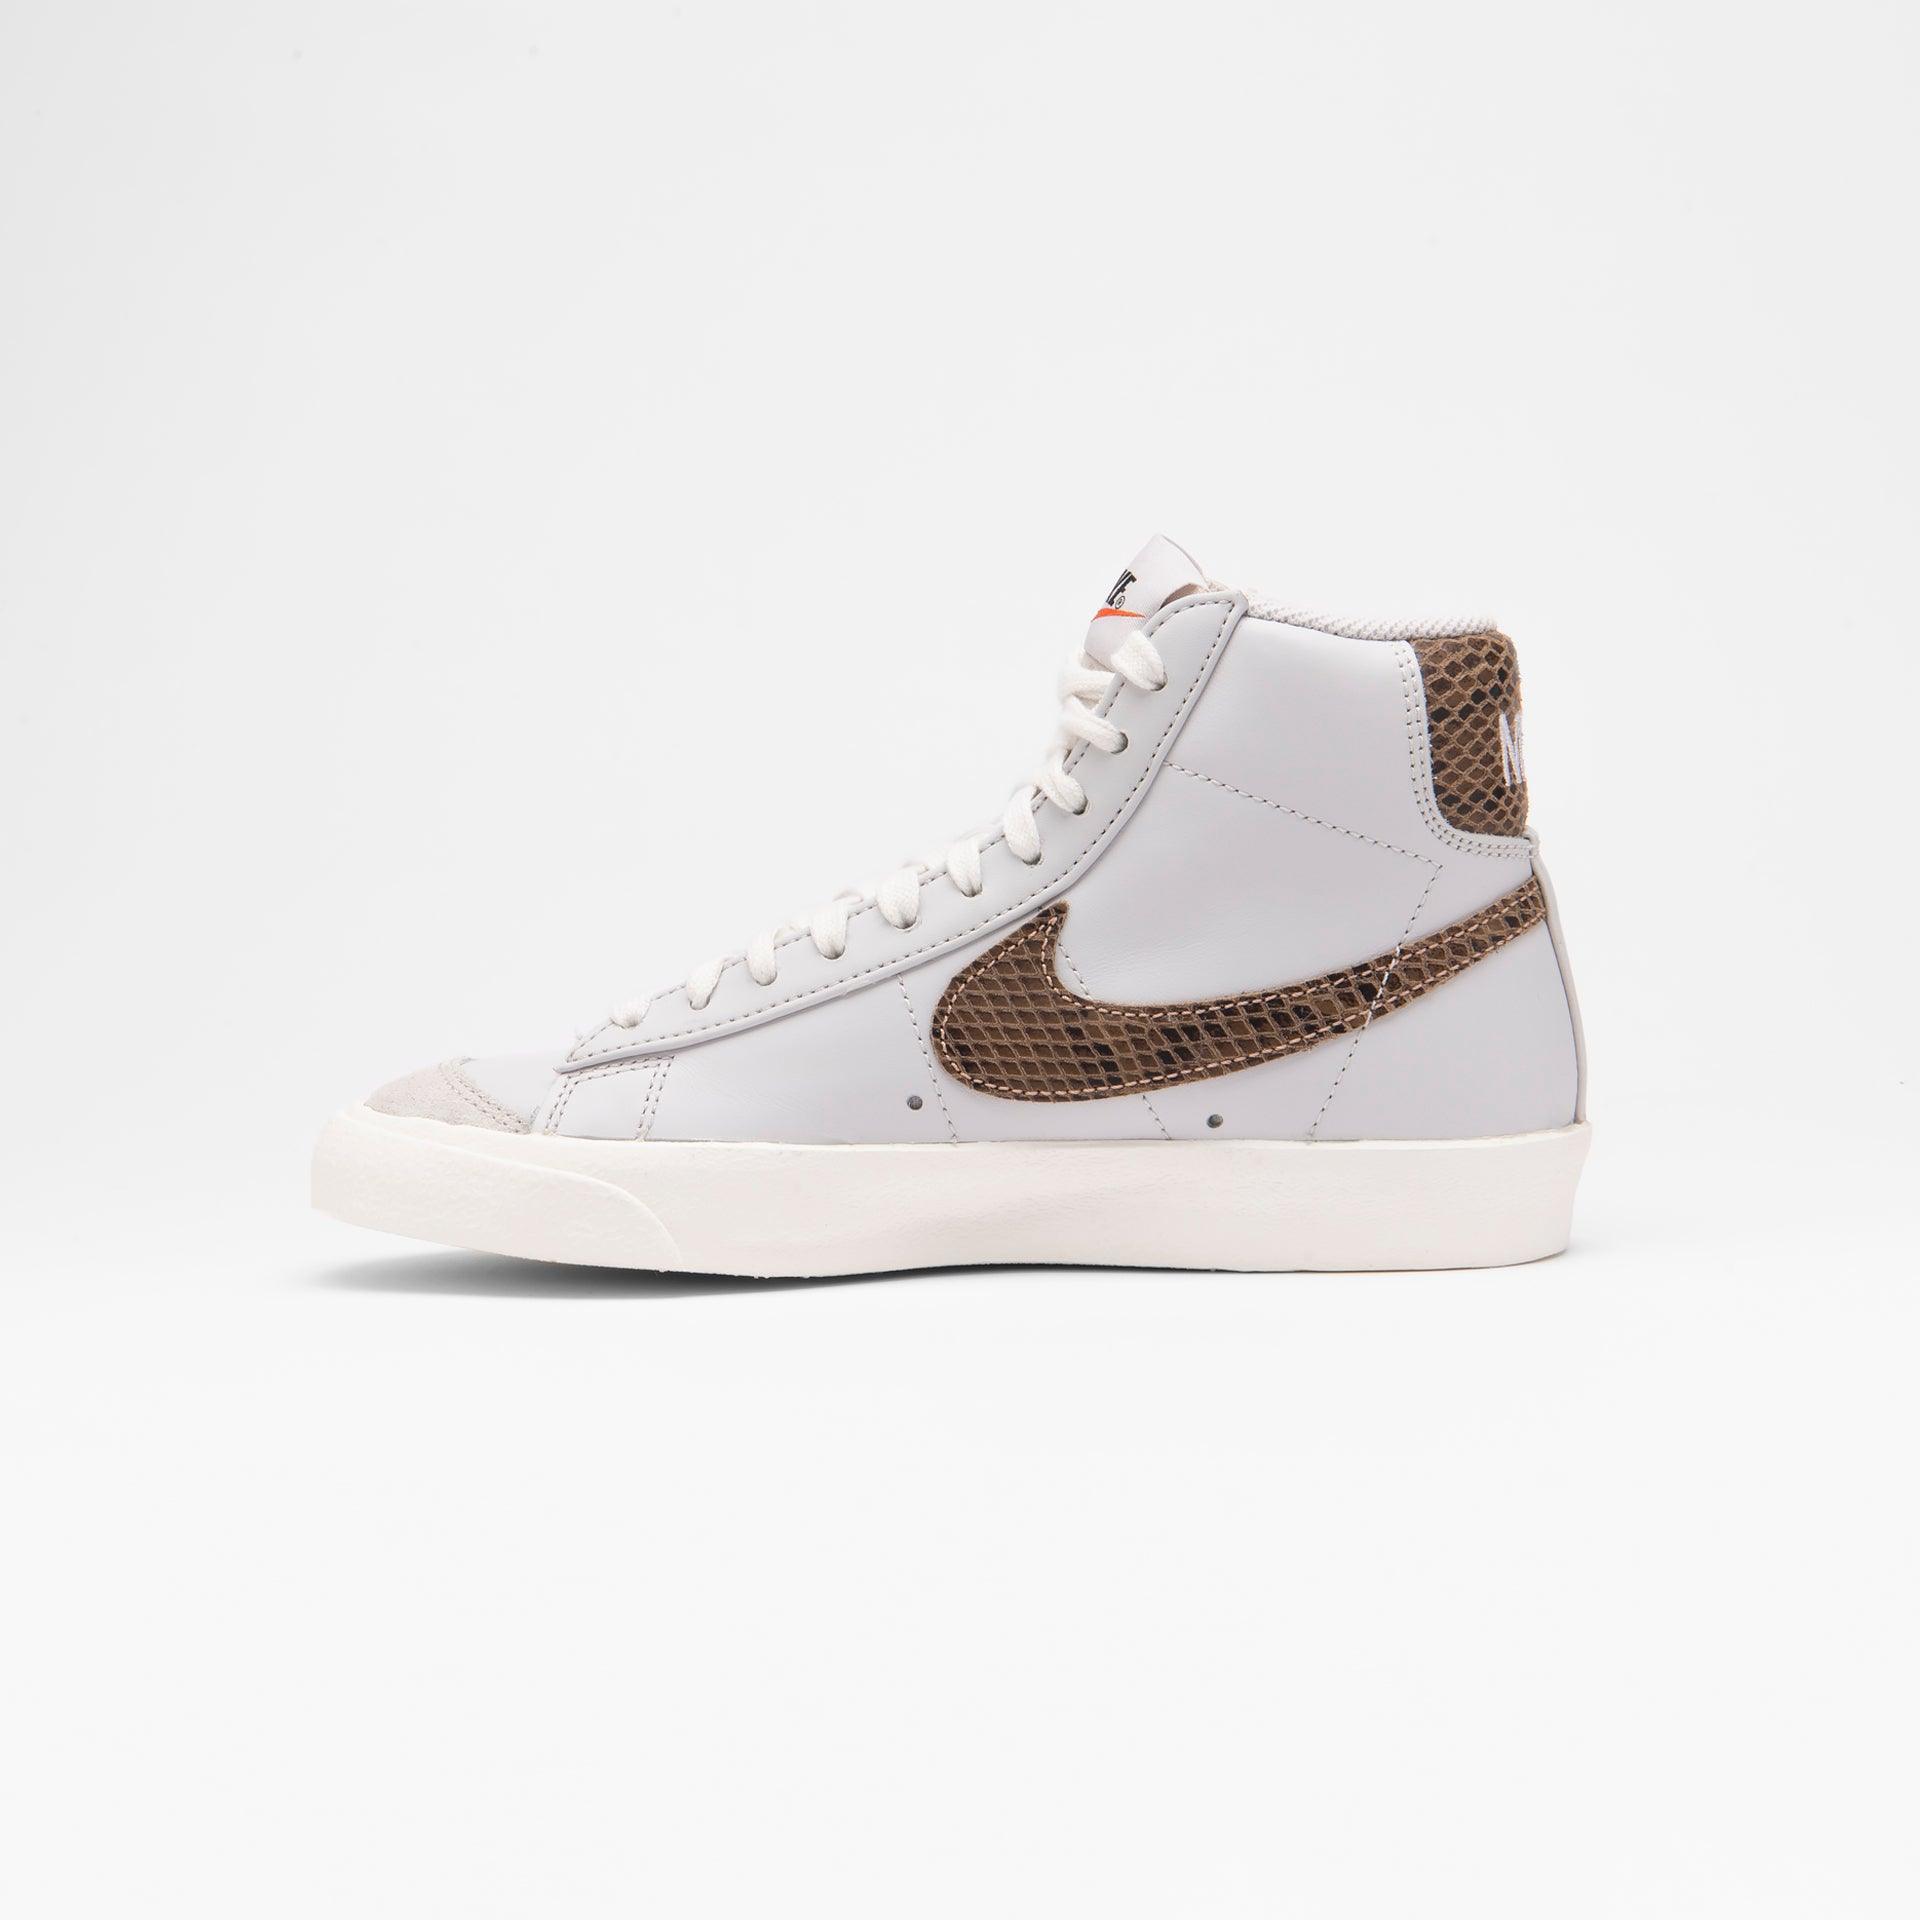 Blazer Mid '77 Vintage WE Reptile Sneakers From Nike - WECRE8